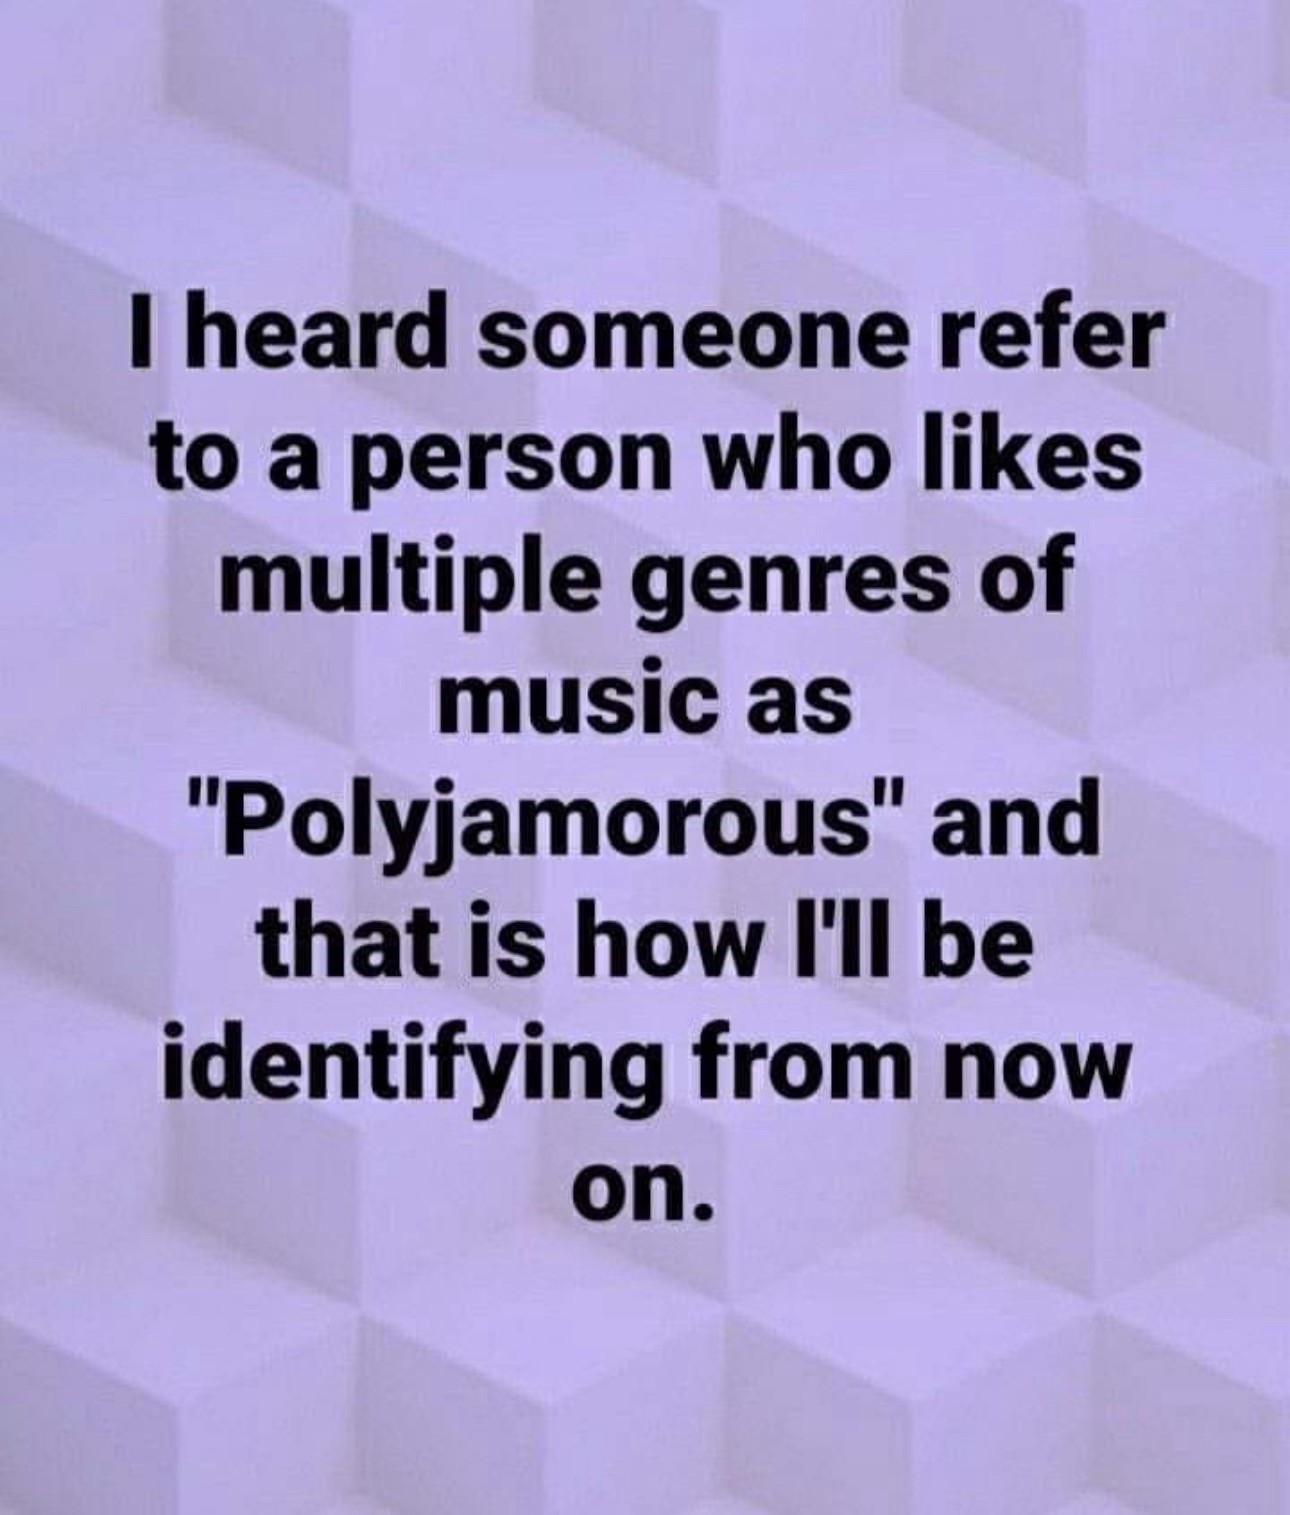 Text on a geometric, light purple background that reads: "I heard someone refer to a person who likes multiple genres of music as 'Polyjamorous' and that is how I'll be identifying from now on."